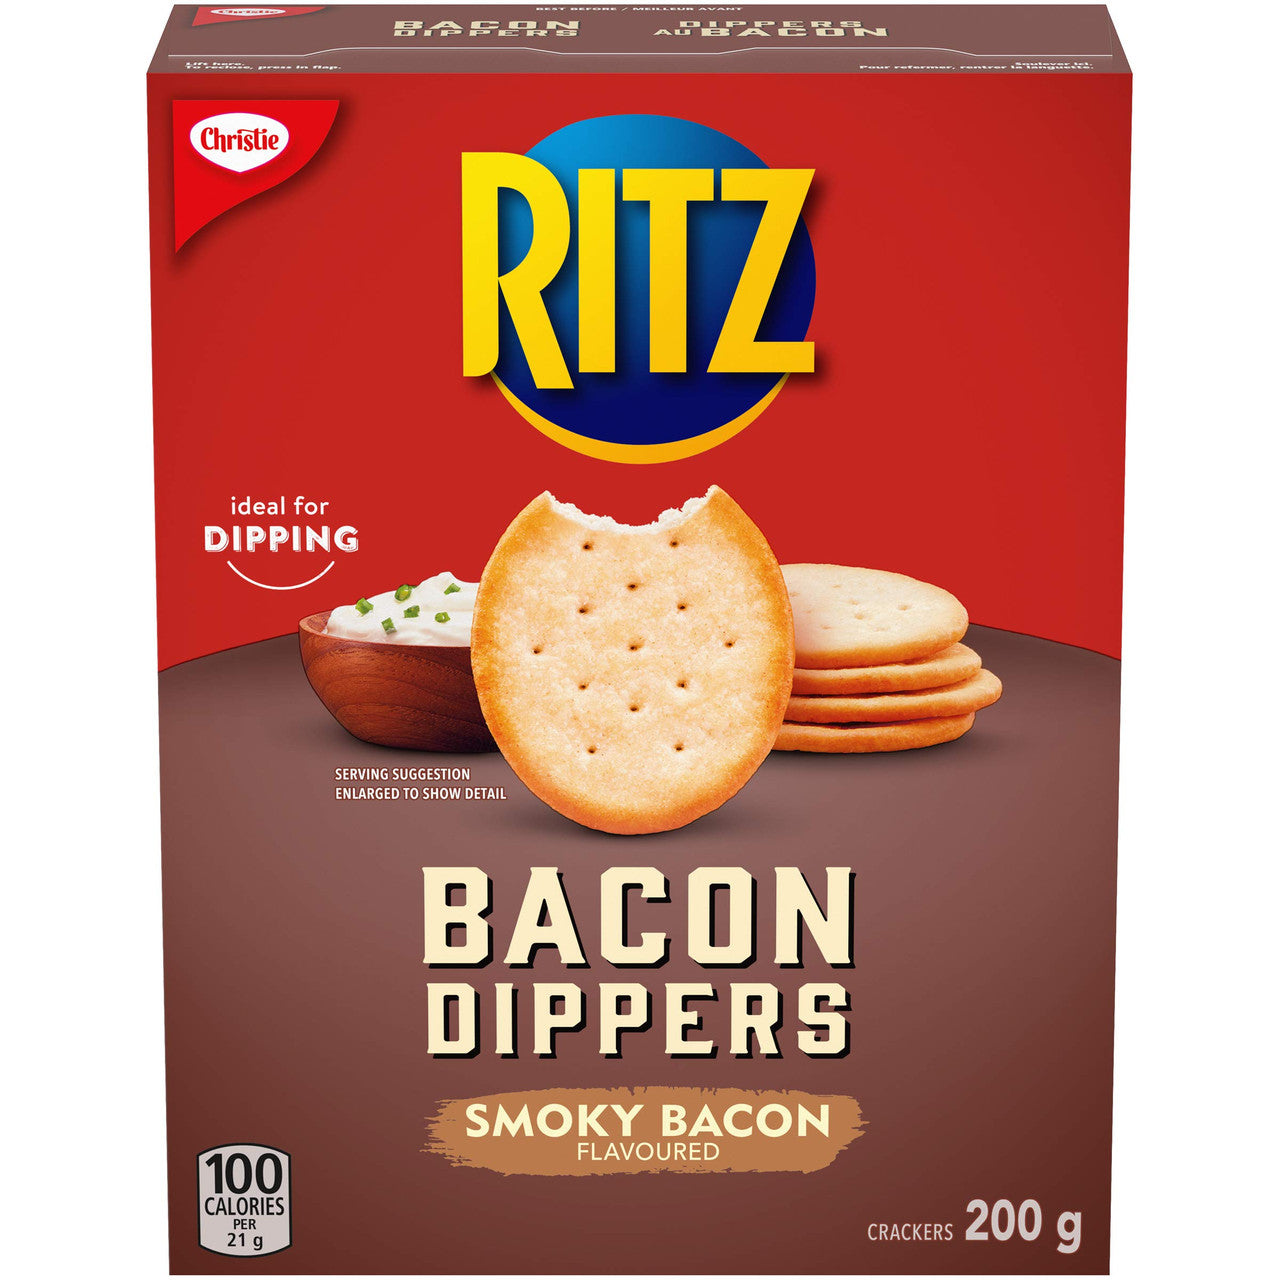 Christie Ritz Bacon Dippers Crackers, 200g/7.1 oz., (3 pack) {Imported from Canada}